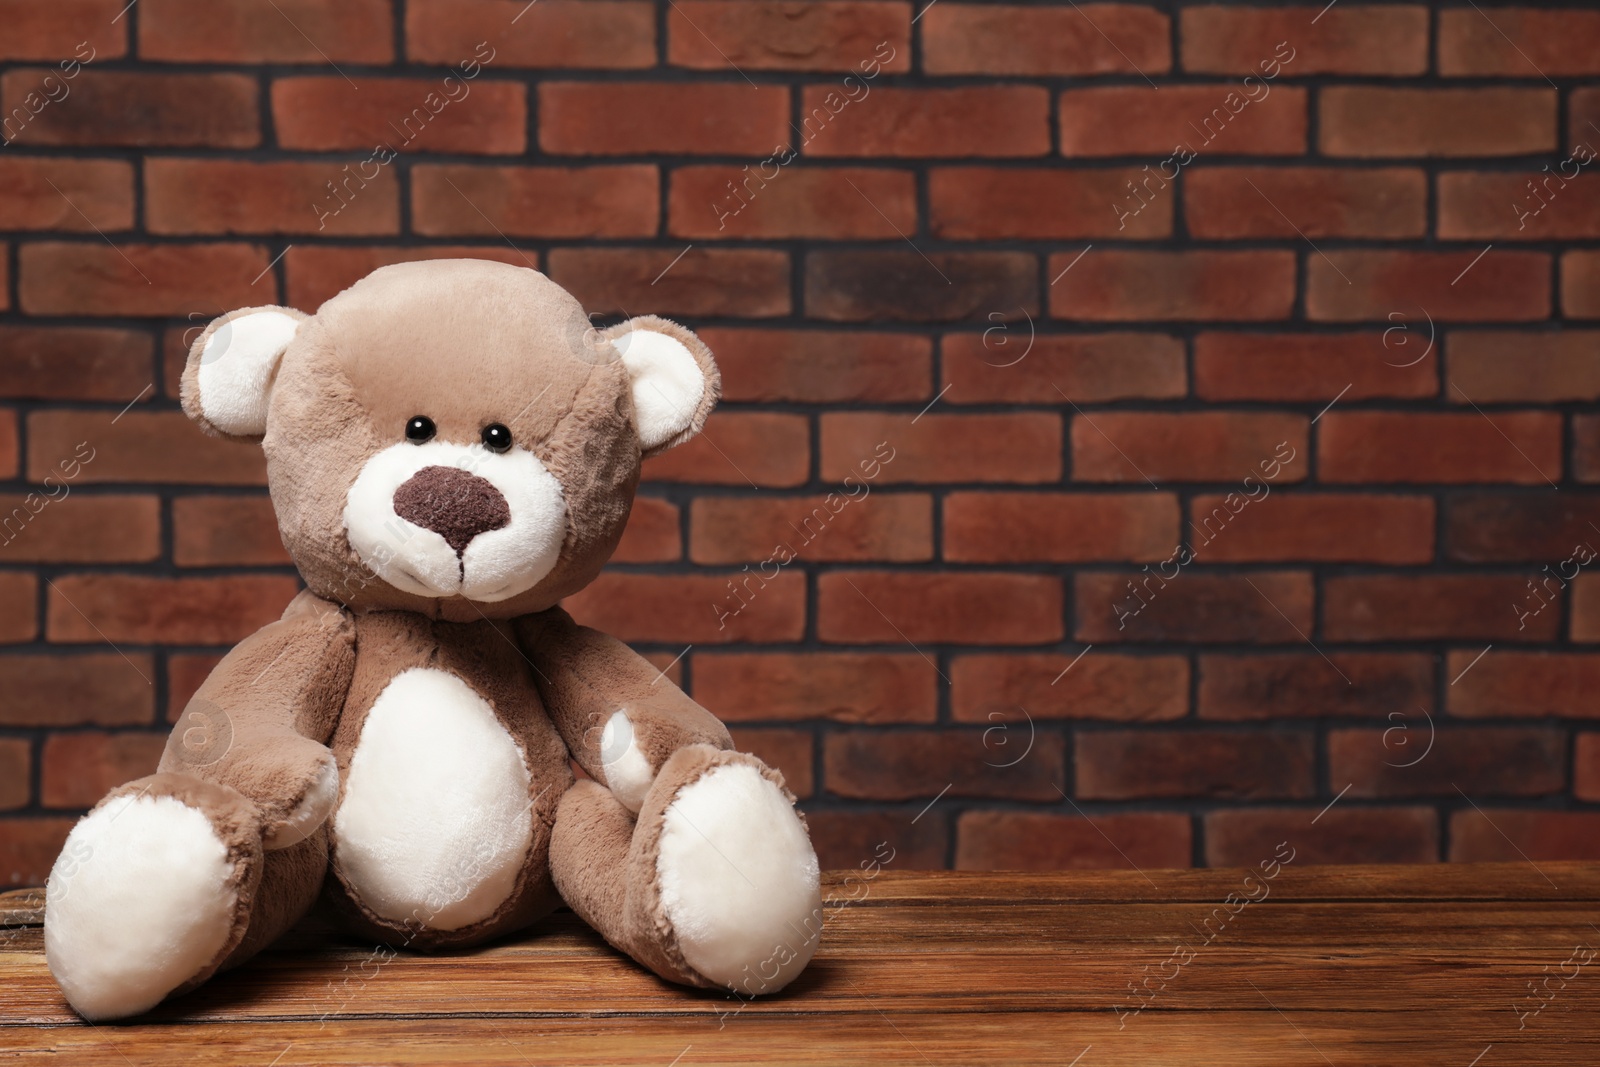 Photo of Cute teddy bear on wooden table near brick wall, space for text